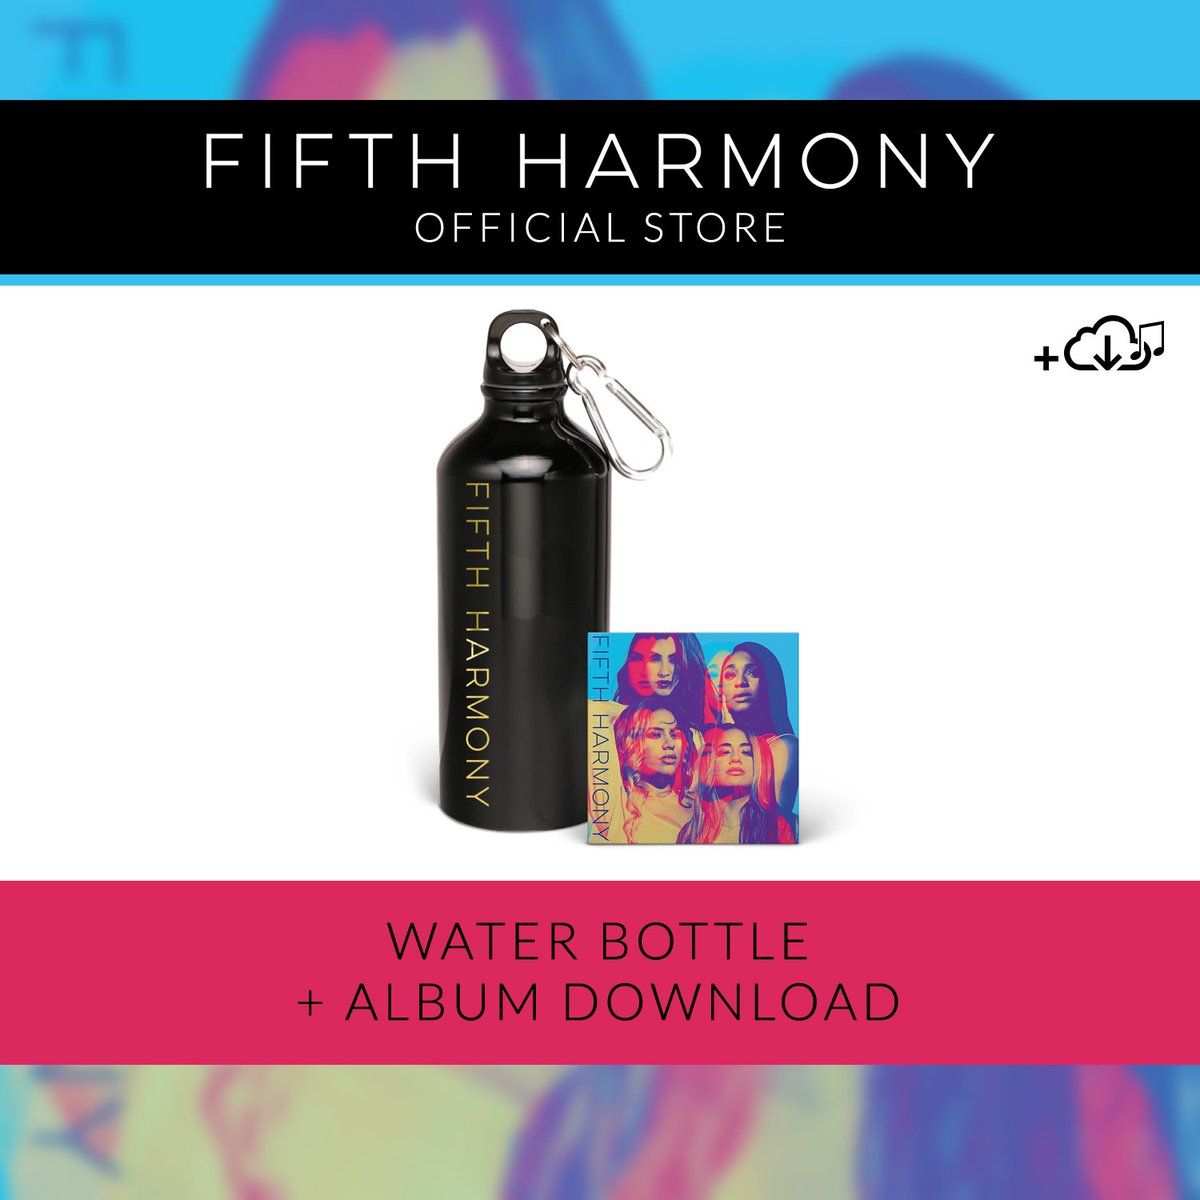 Harmonizers! Exclusive merch is available with pre-order bundles at fifthharmony.co/D2CStore 😘